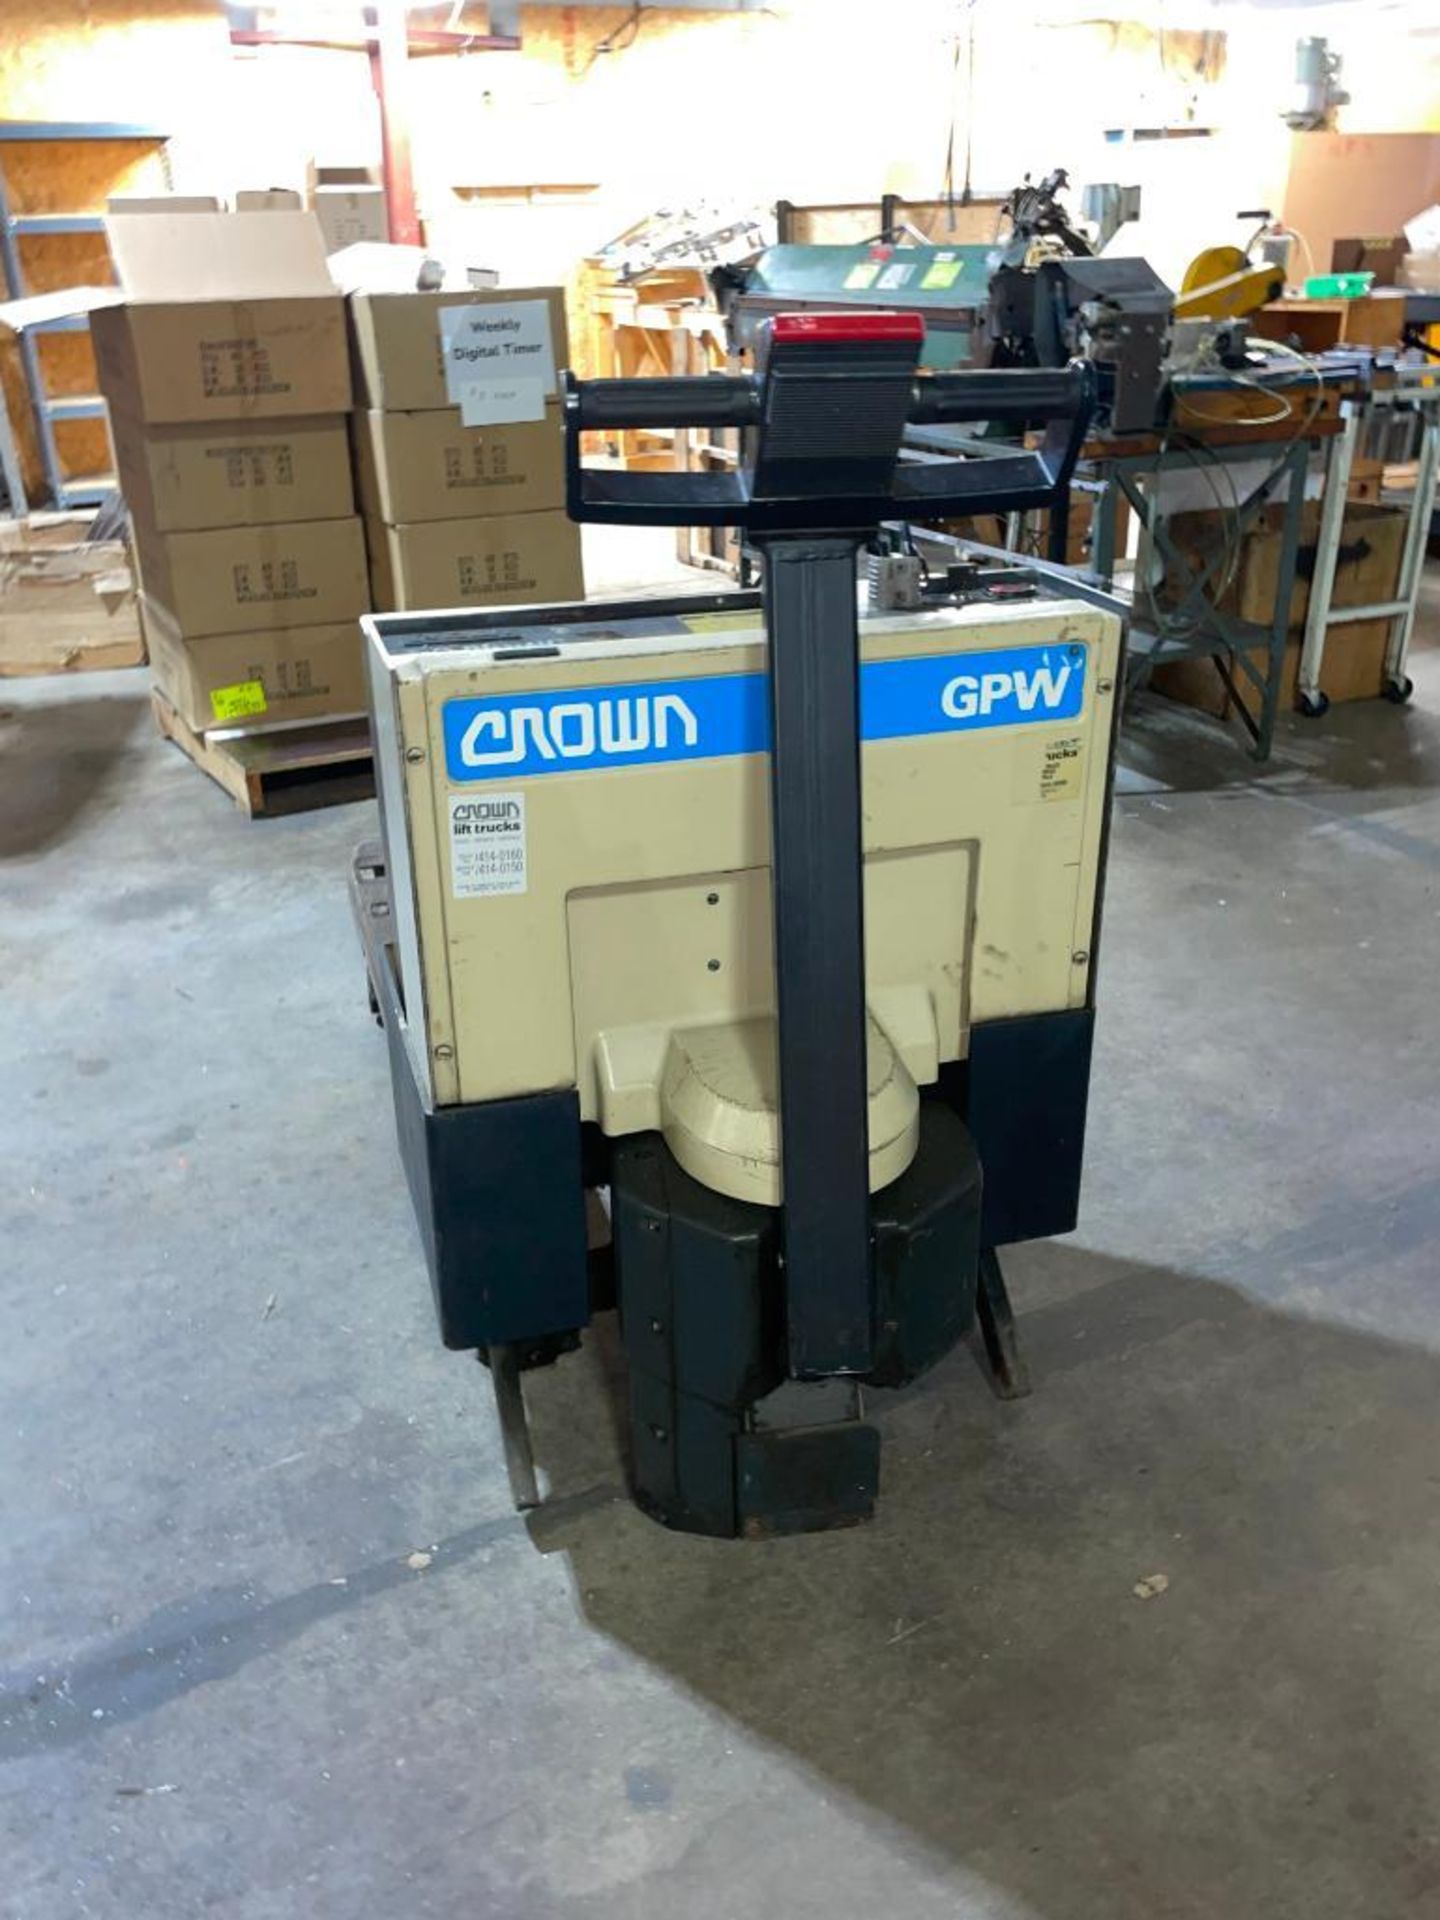 Crown 4K Capacity Model GPW-4-14 Electric Pallet Lift - Image 2 of 4